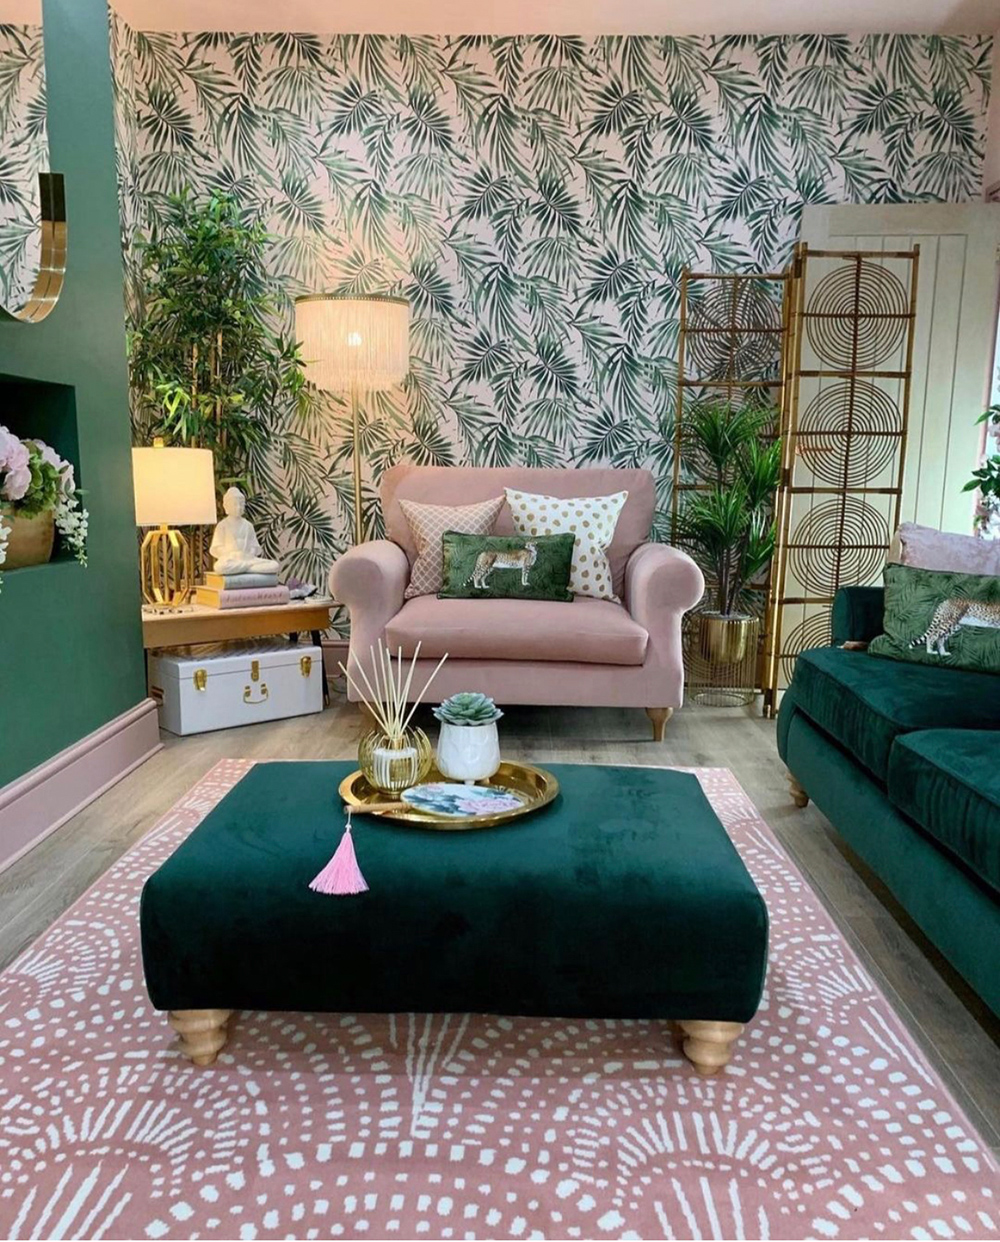 Pink and green tropical decor. Gorgeous green tropical palm leaf wallpaper, with pink and teal velvet sofas and pink patterned rug